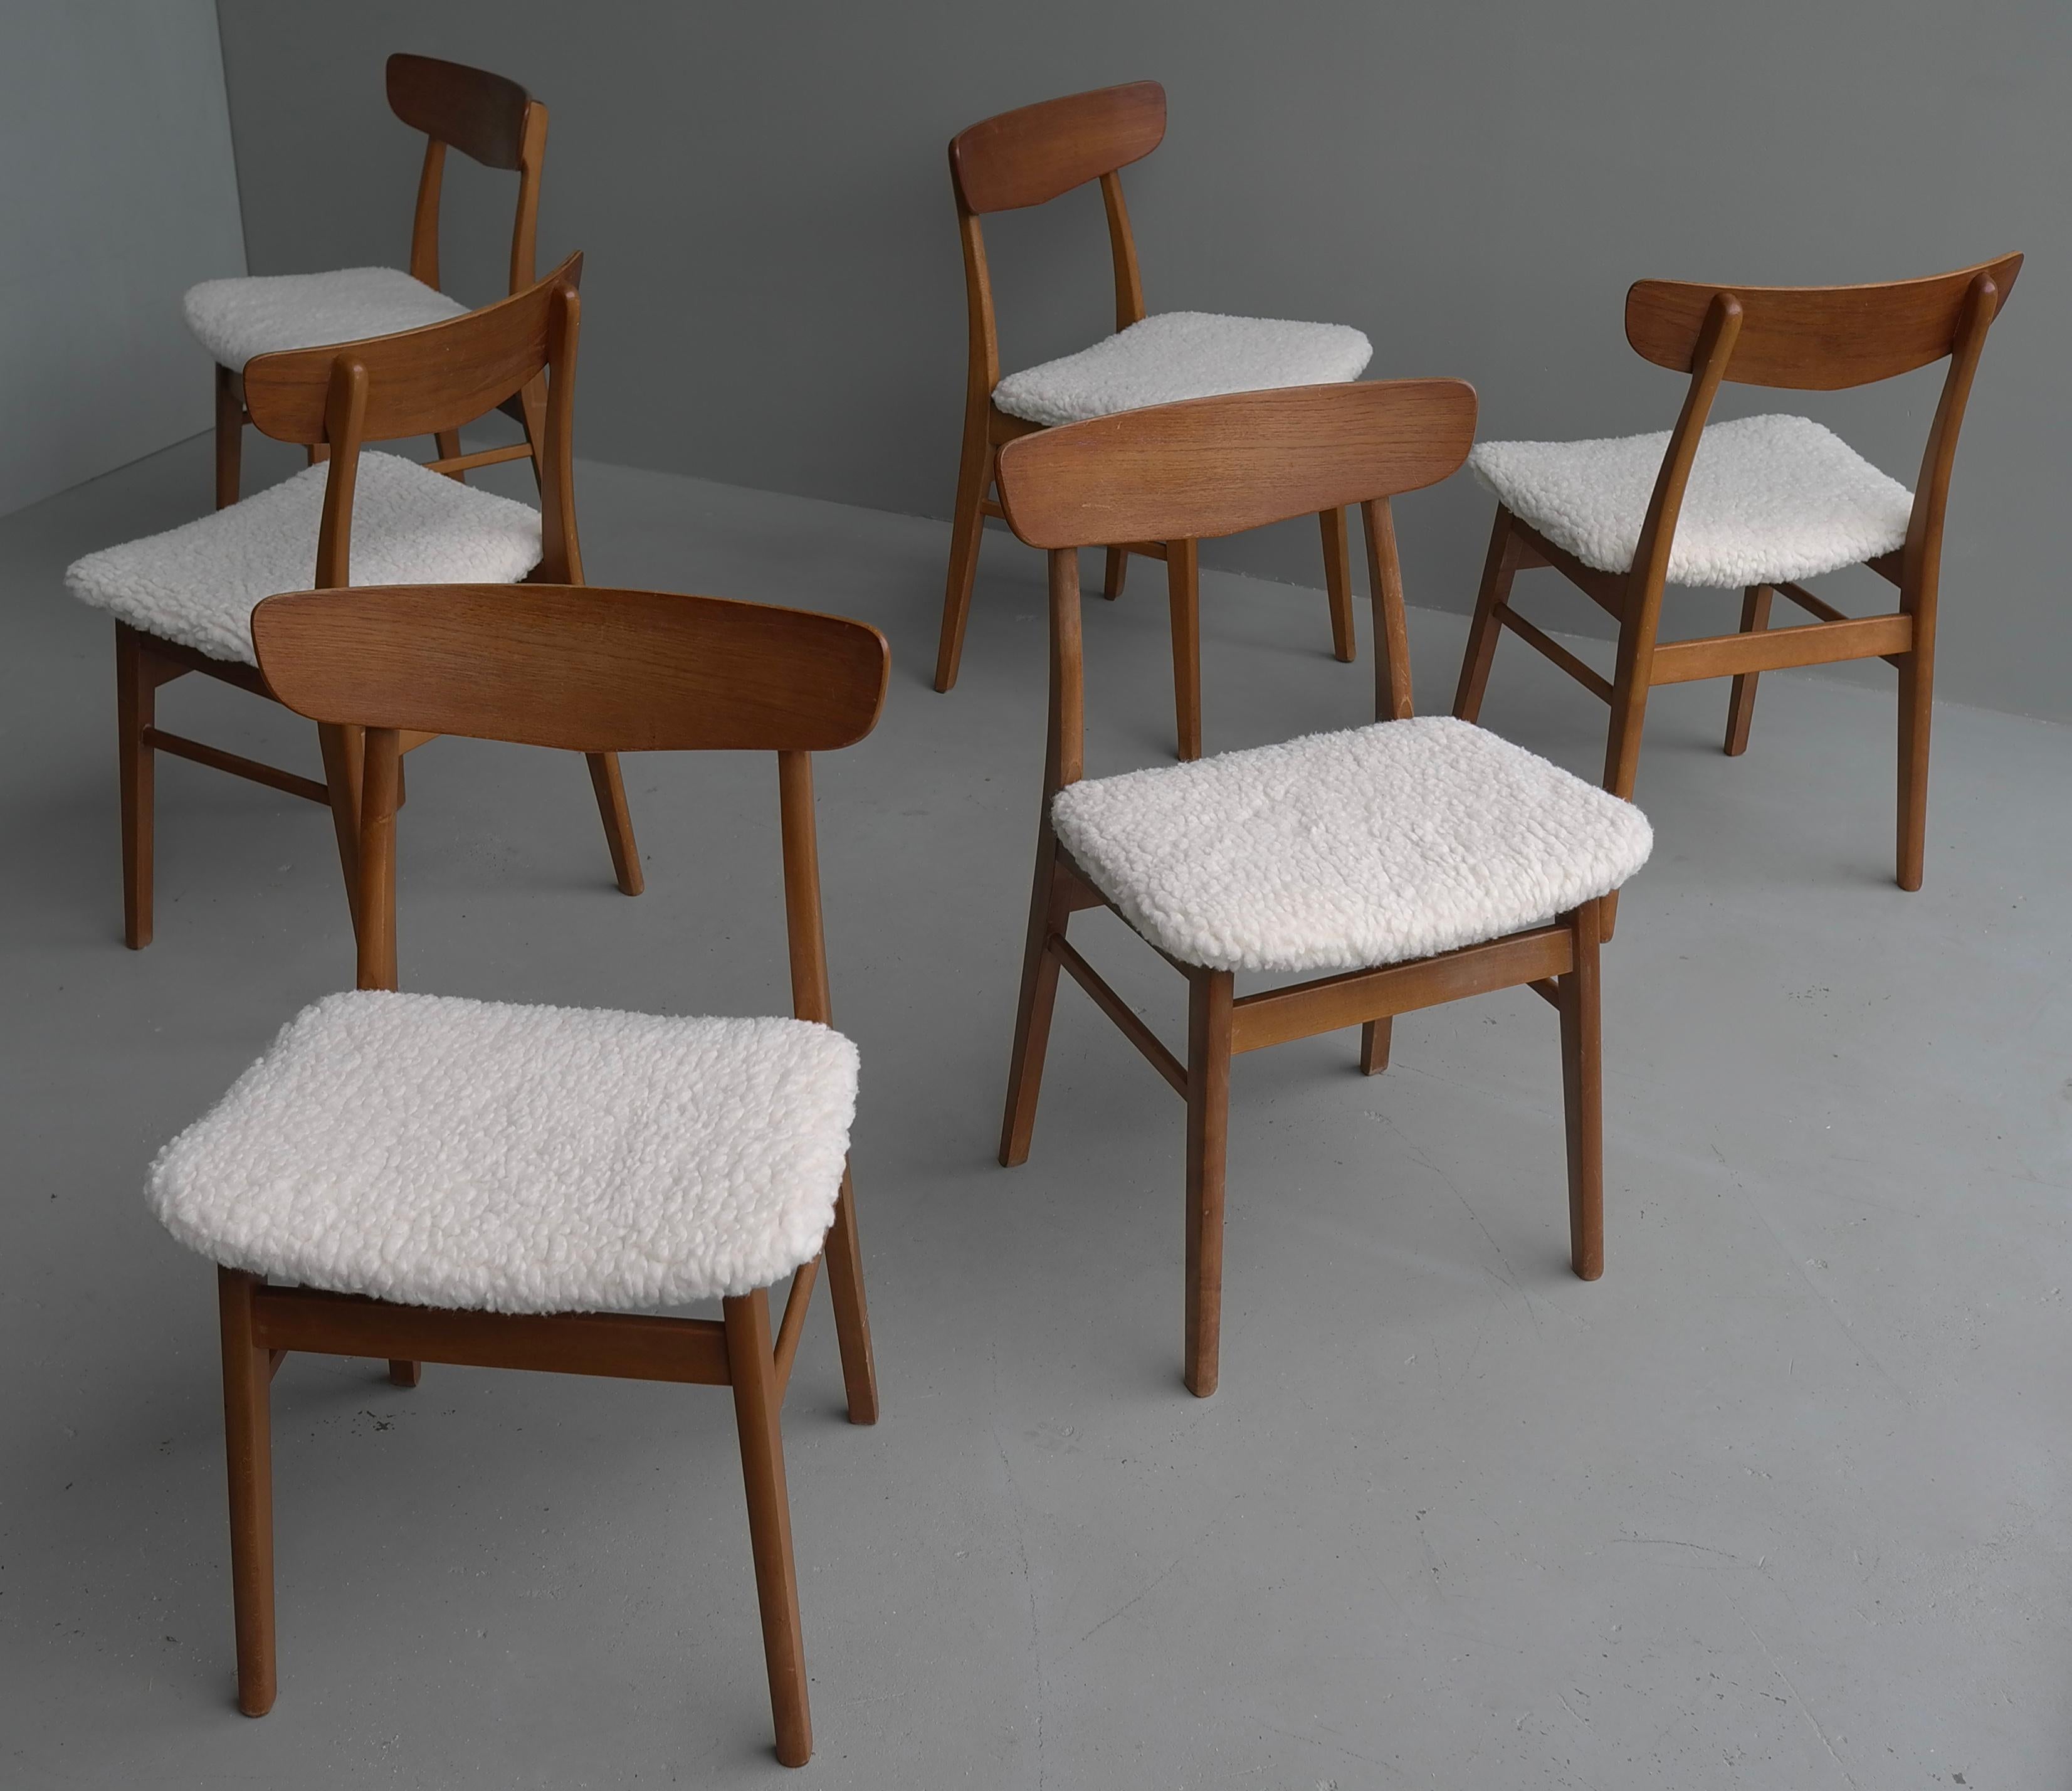 Six Teak Danish Heart Chairs with Seats in Pure Merino Wool, by Farstrup Møbler 10